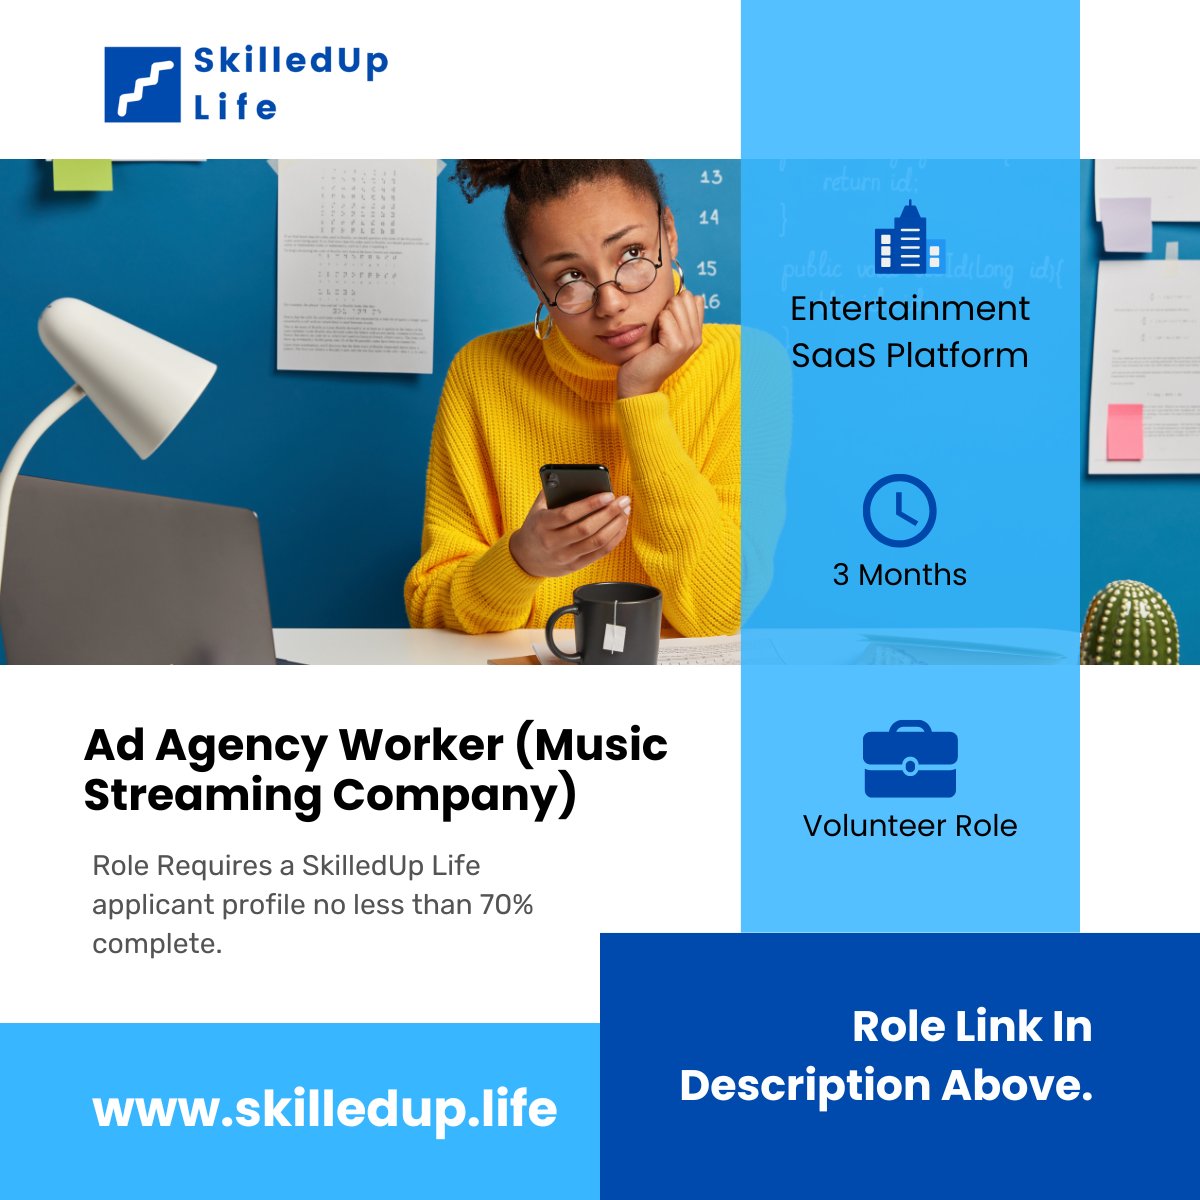 🎵 Join 7th Century Media Group Ltd as an Ad Agency volunteer! Dive into the world of music marketing and make a difference. Apply now:  skilledup.life/opportunity/7t…
#VolunteerOpportunity
#AdAgency
#MusicStreaming
#SkilledUpLife